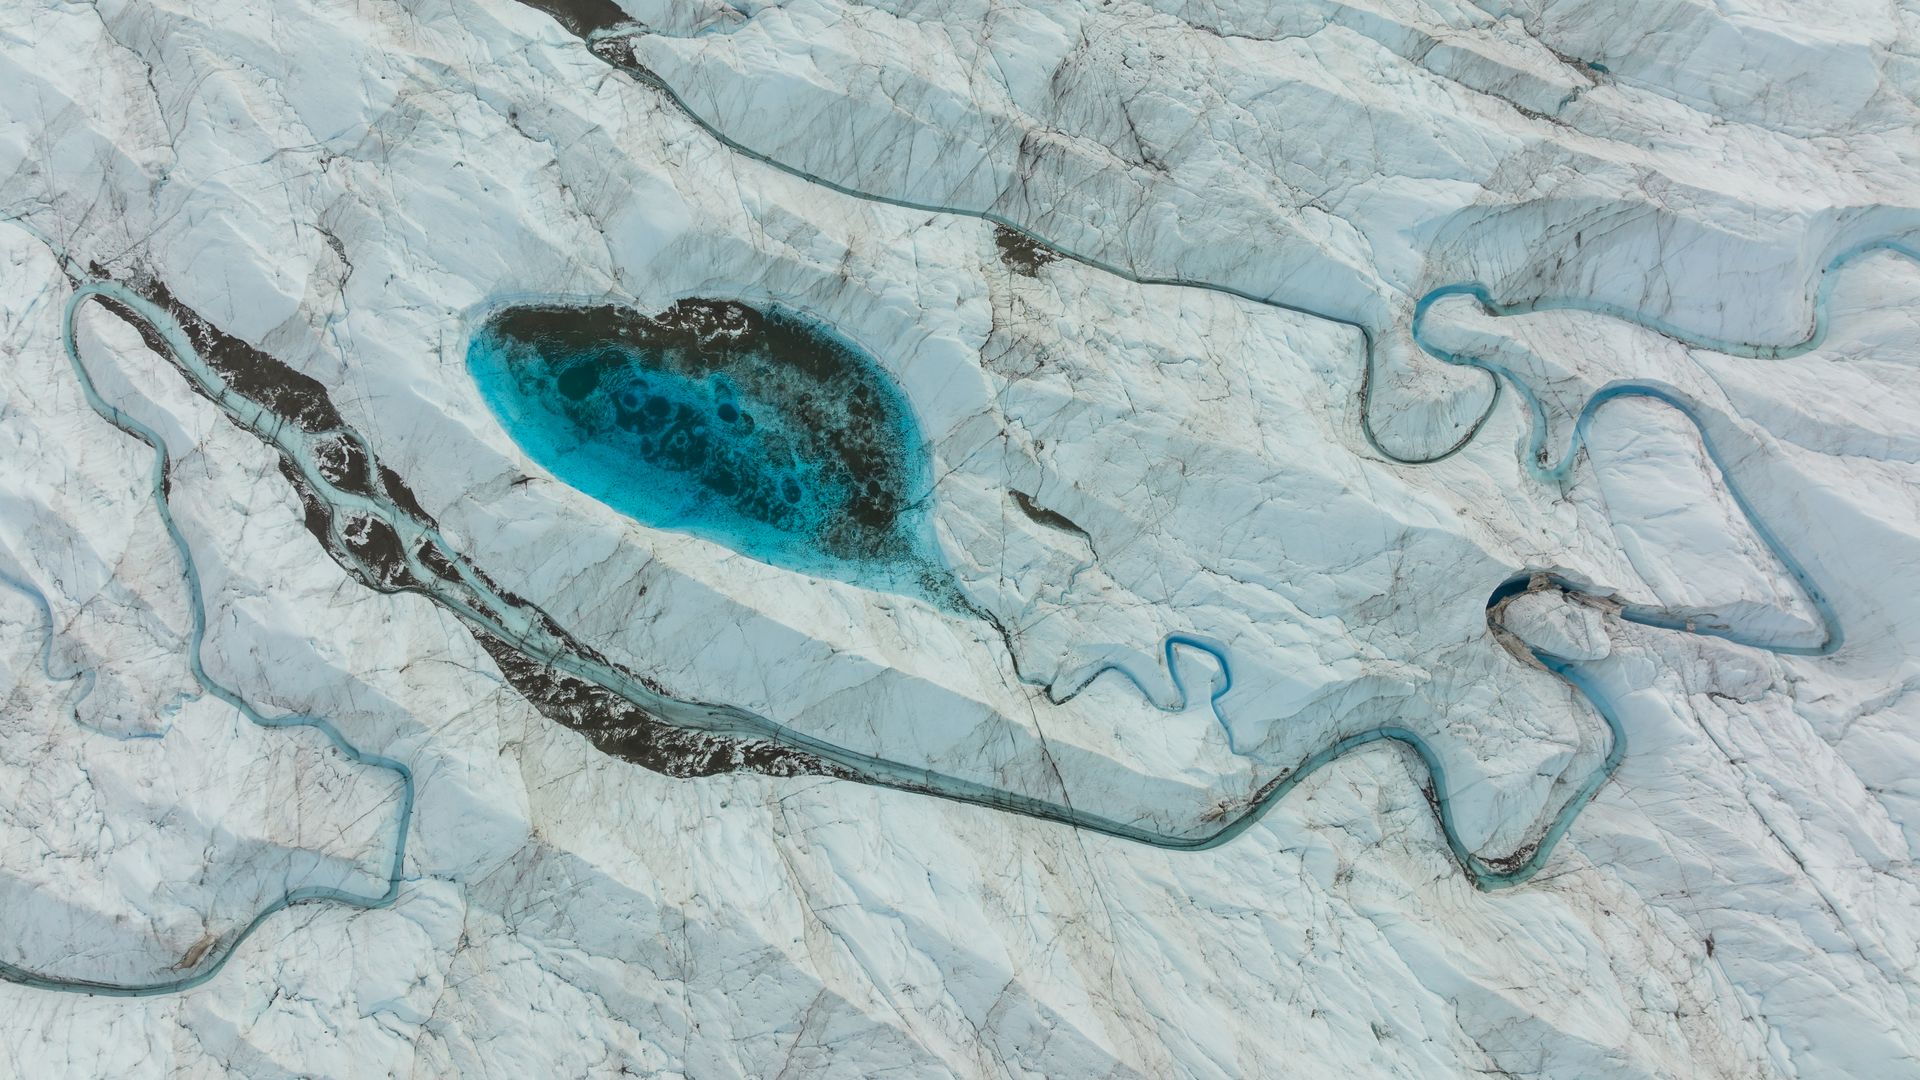 Meltwater lakes on the Greenland ice sheet in August 2022.